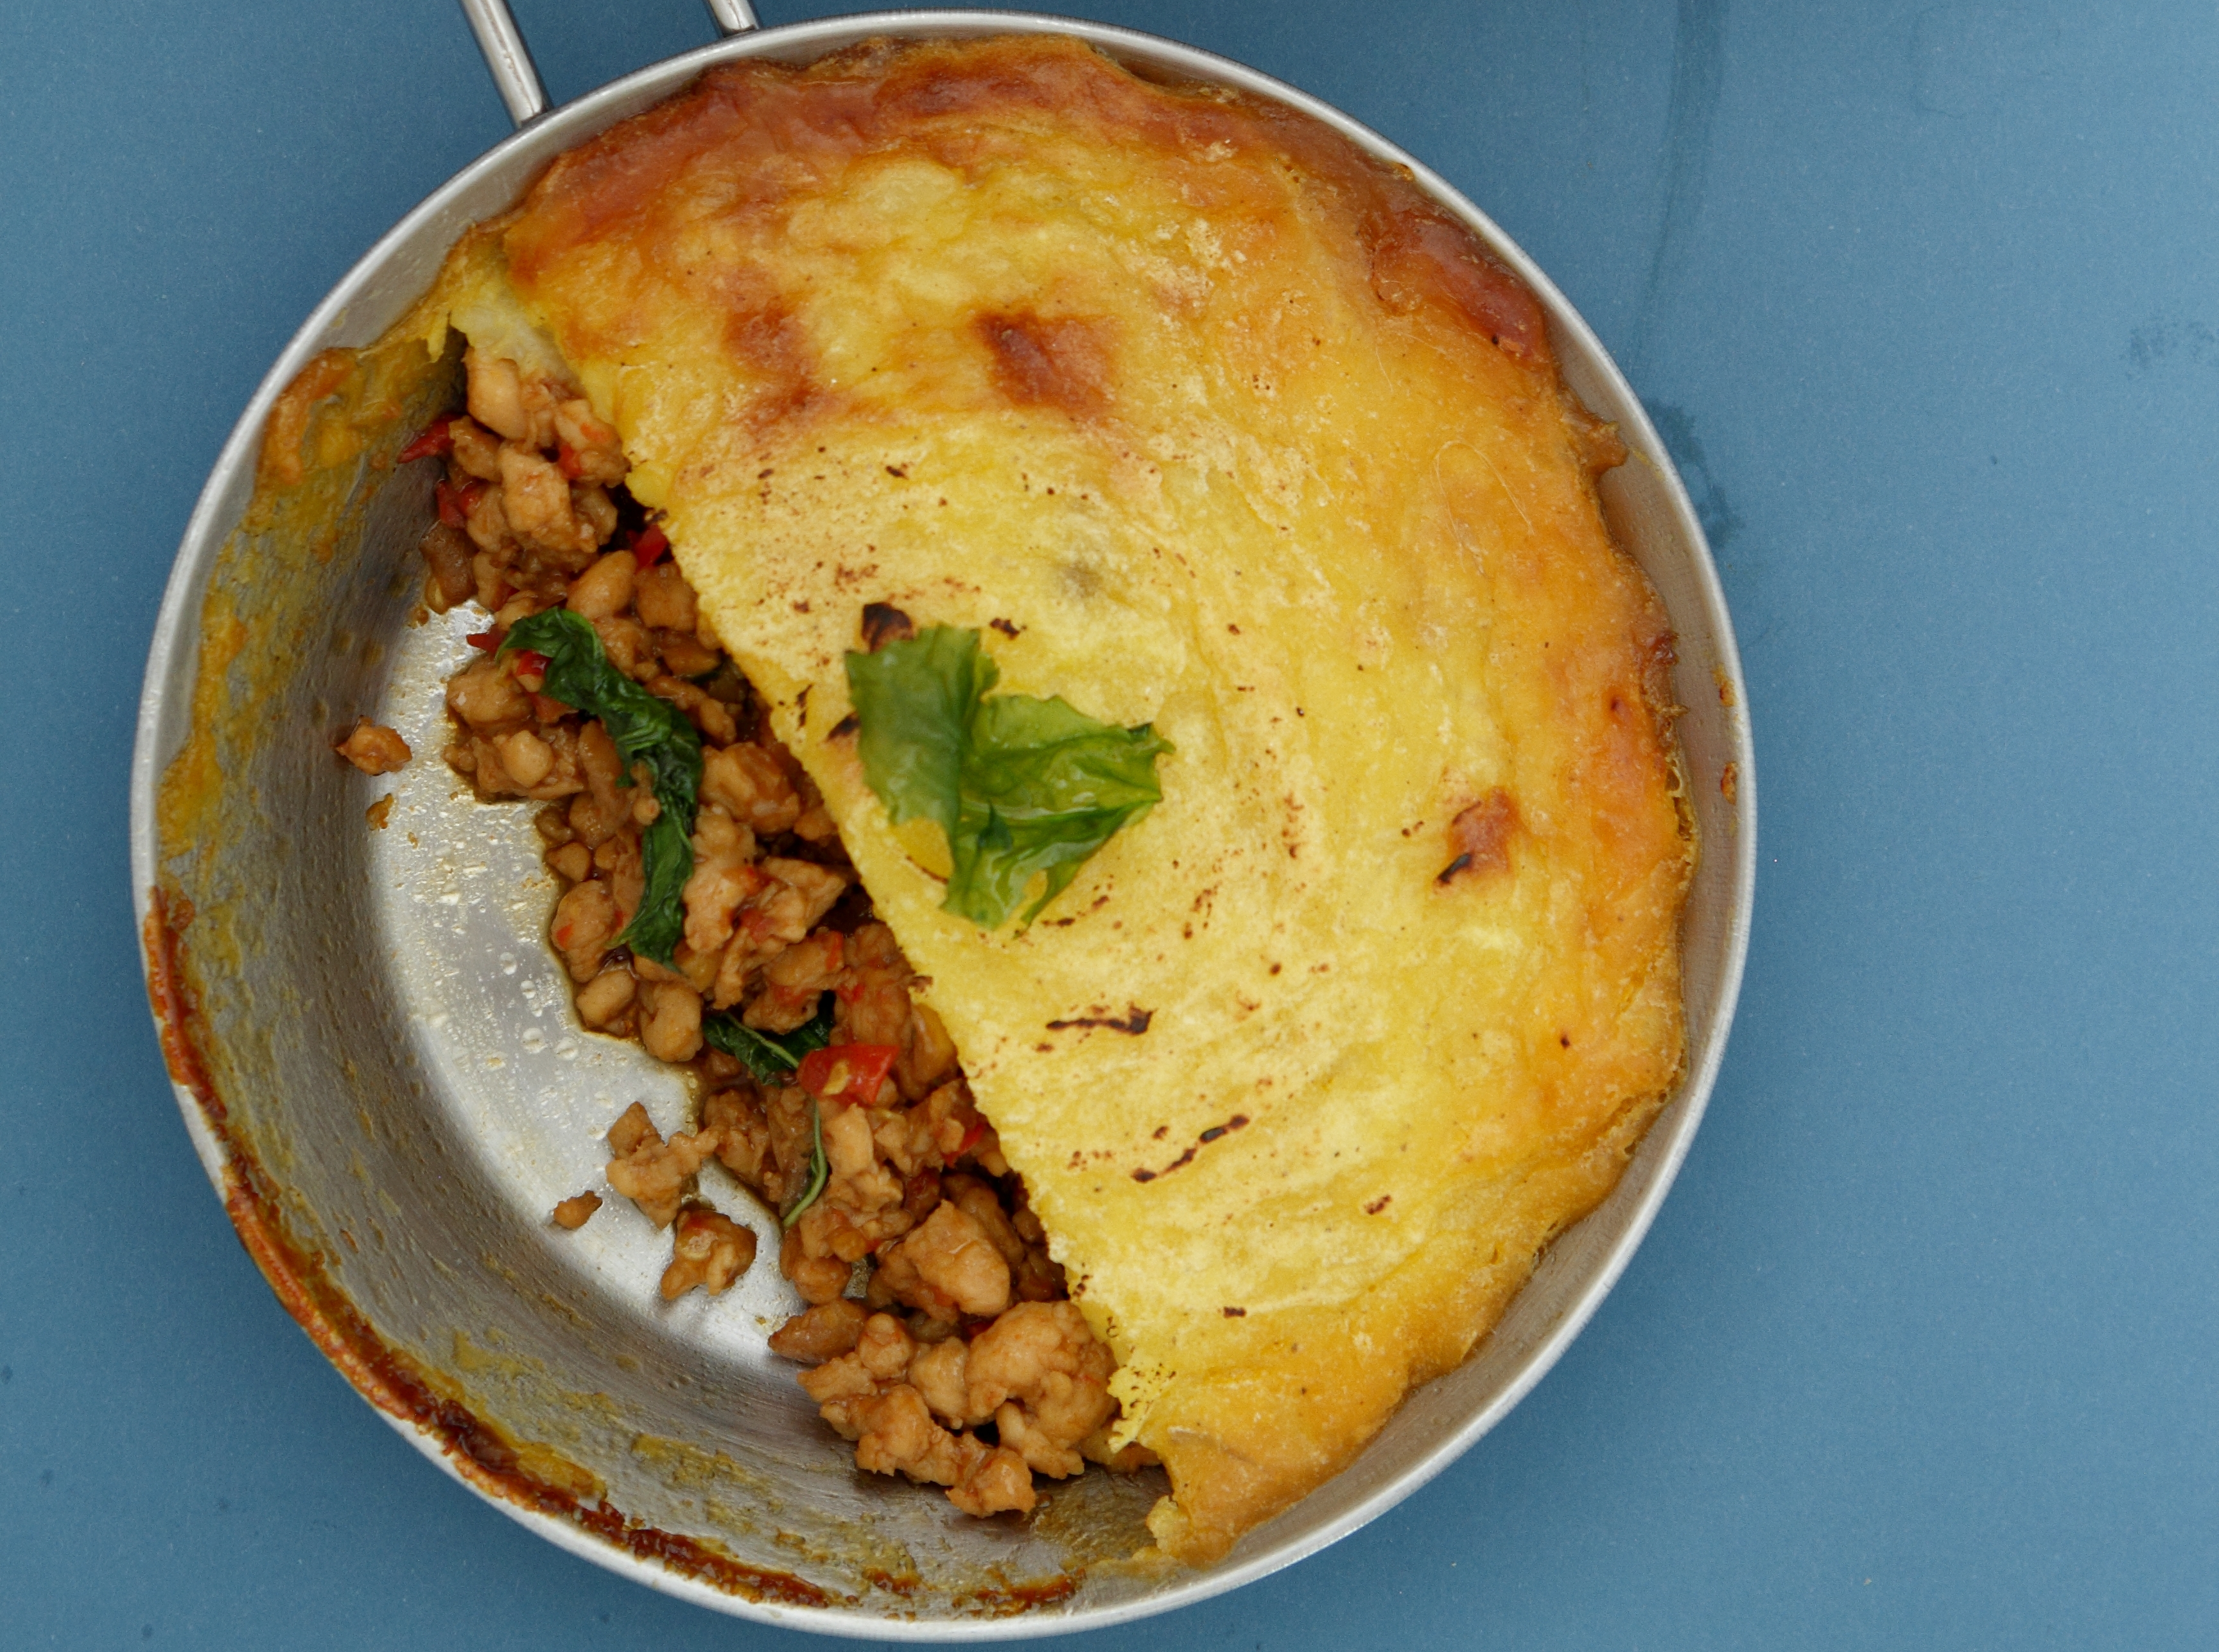 Thai "Cottage Pie" with Durian Mash and Spicy Basil Chicken